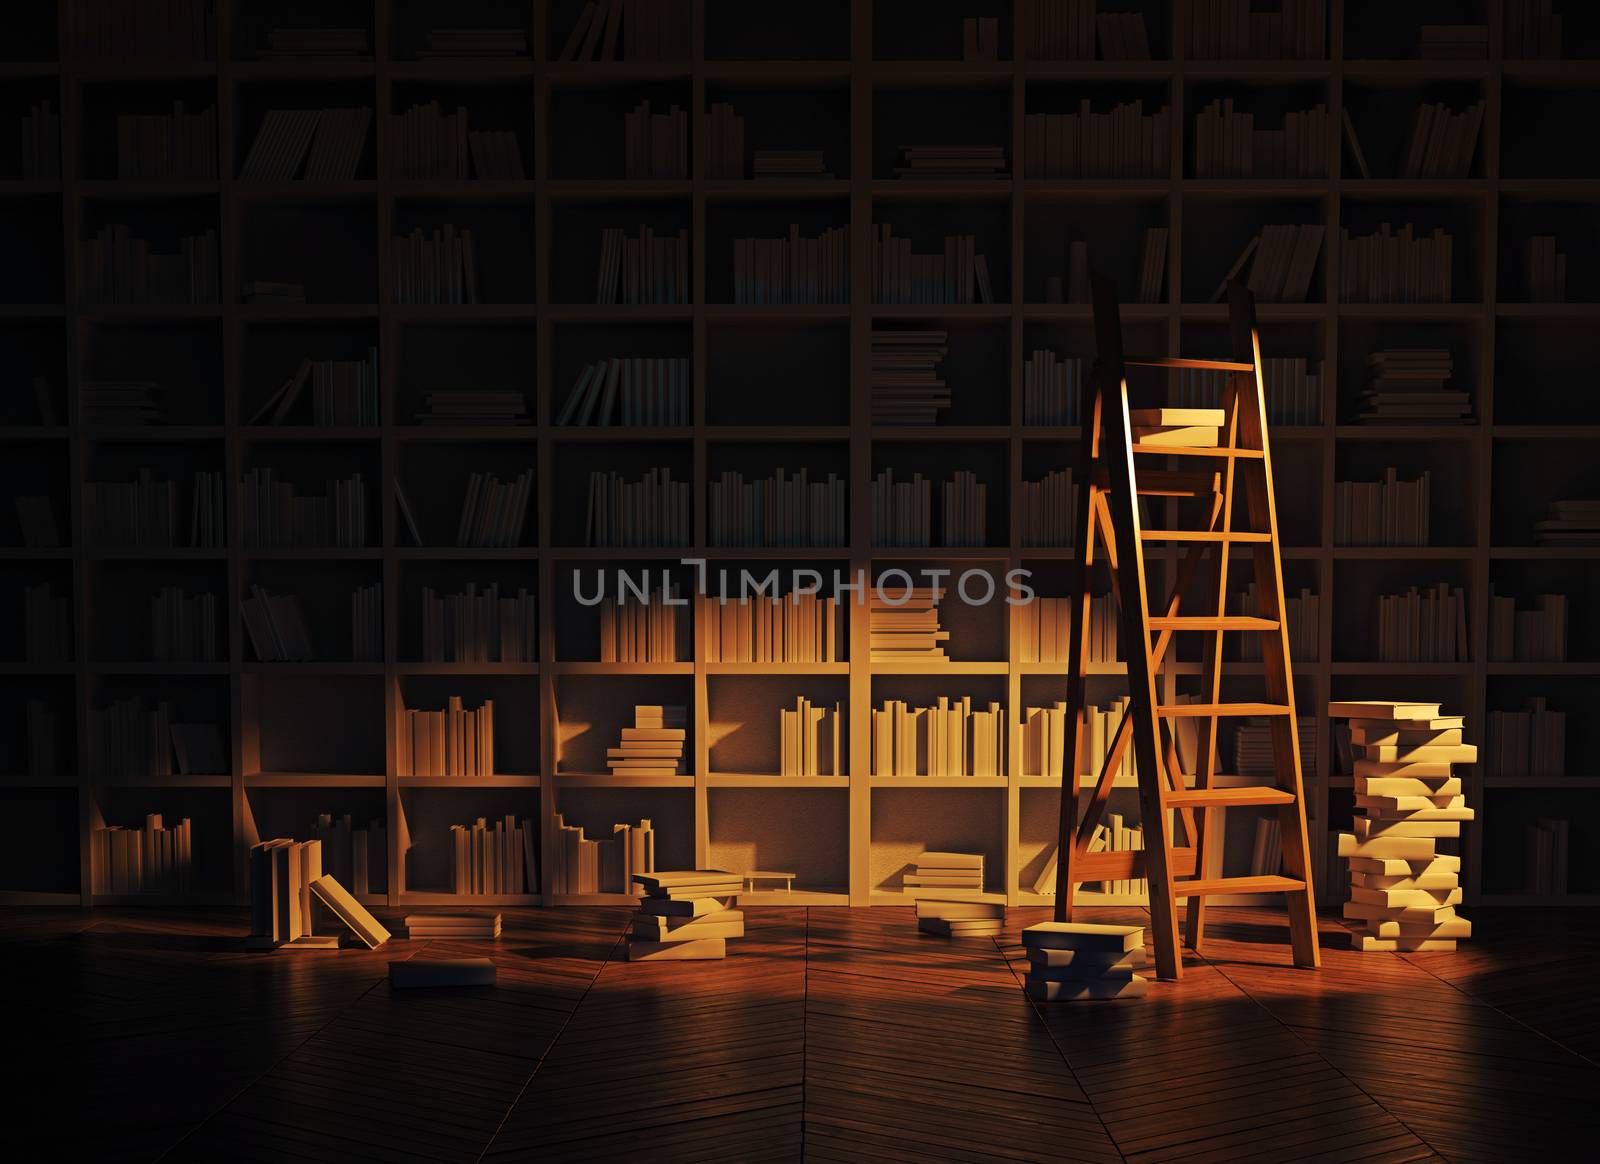  library interior by vicnt